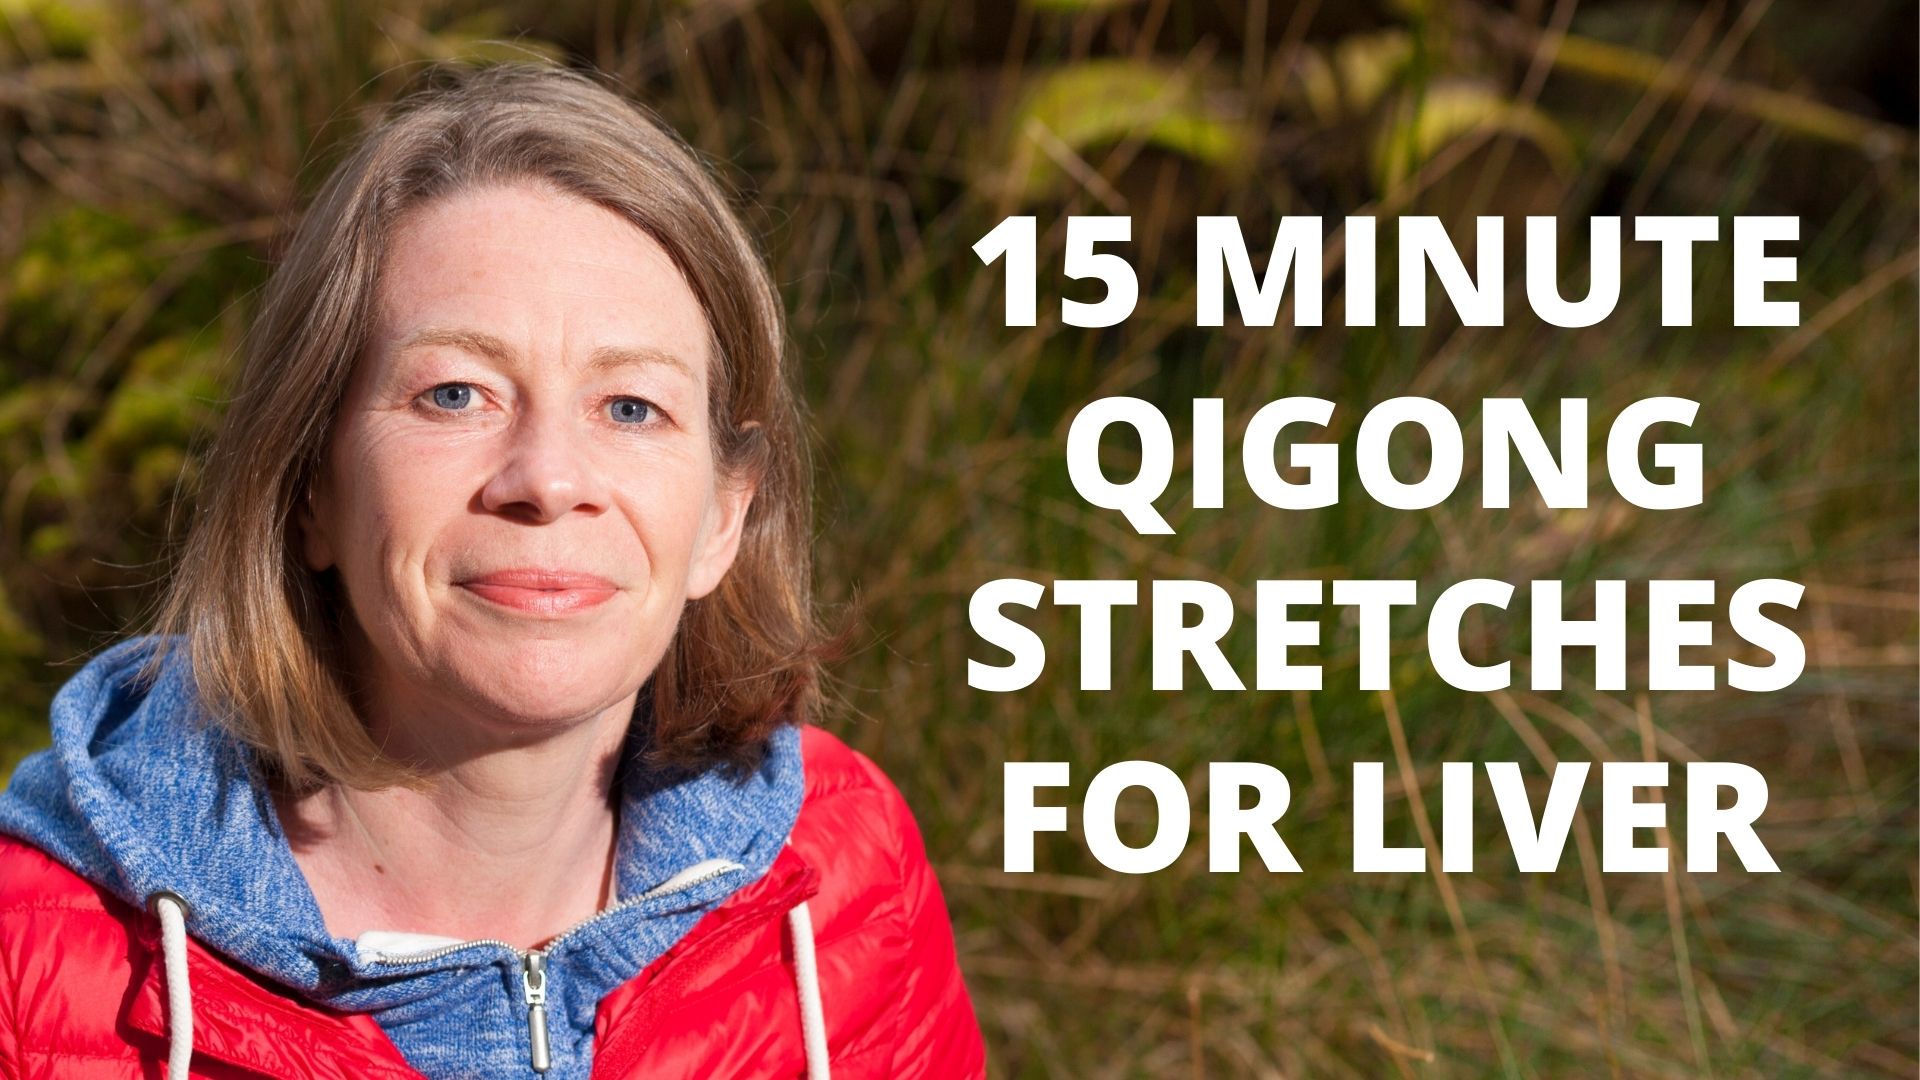 15_Minute_Qigong_-_Qigong_Stretches_For_Liver